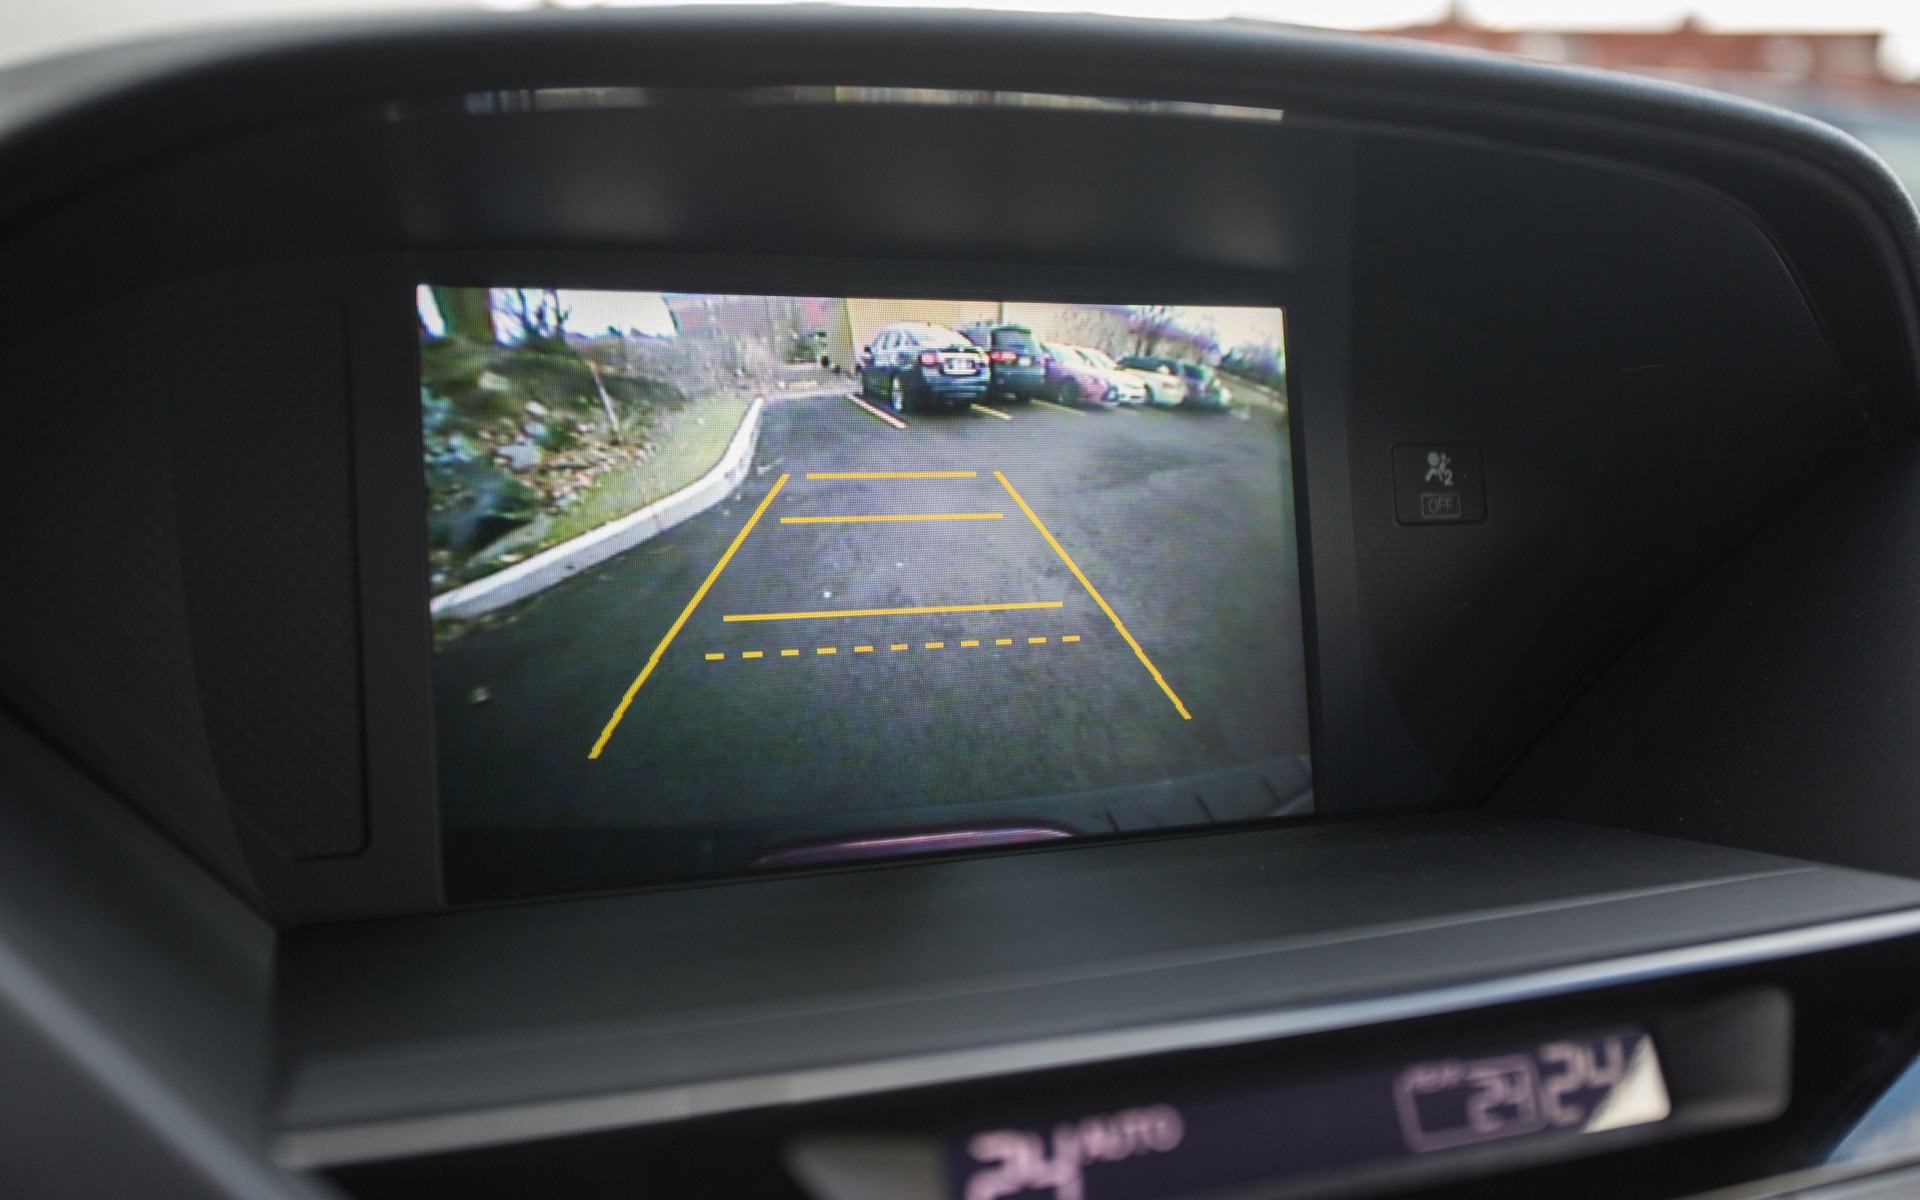 The rearview camera is practical and well located.